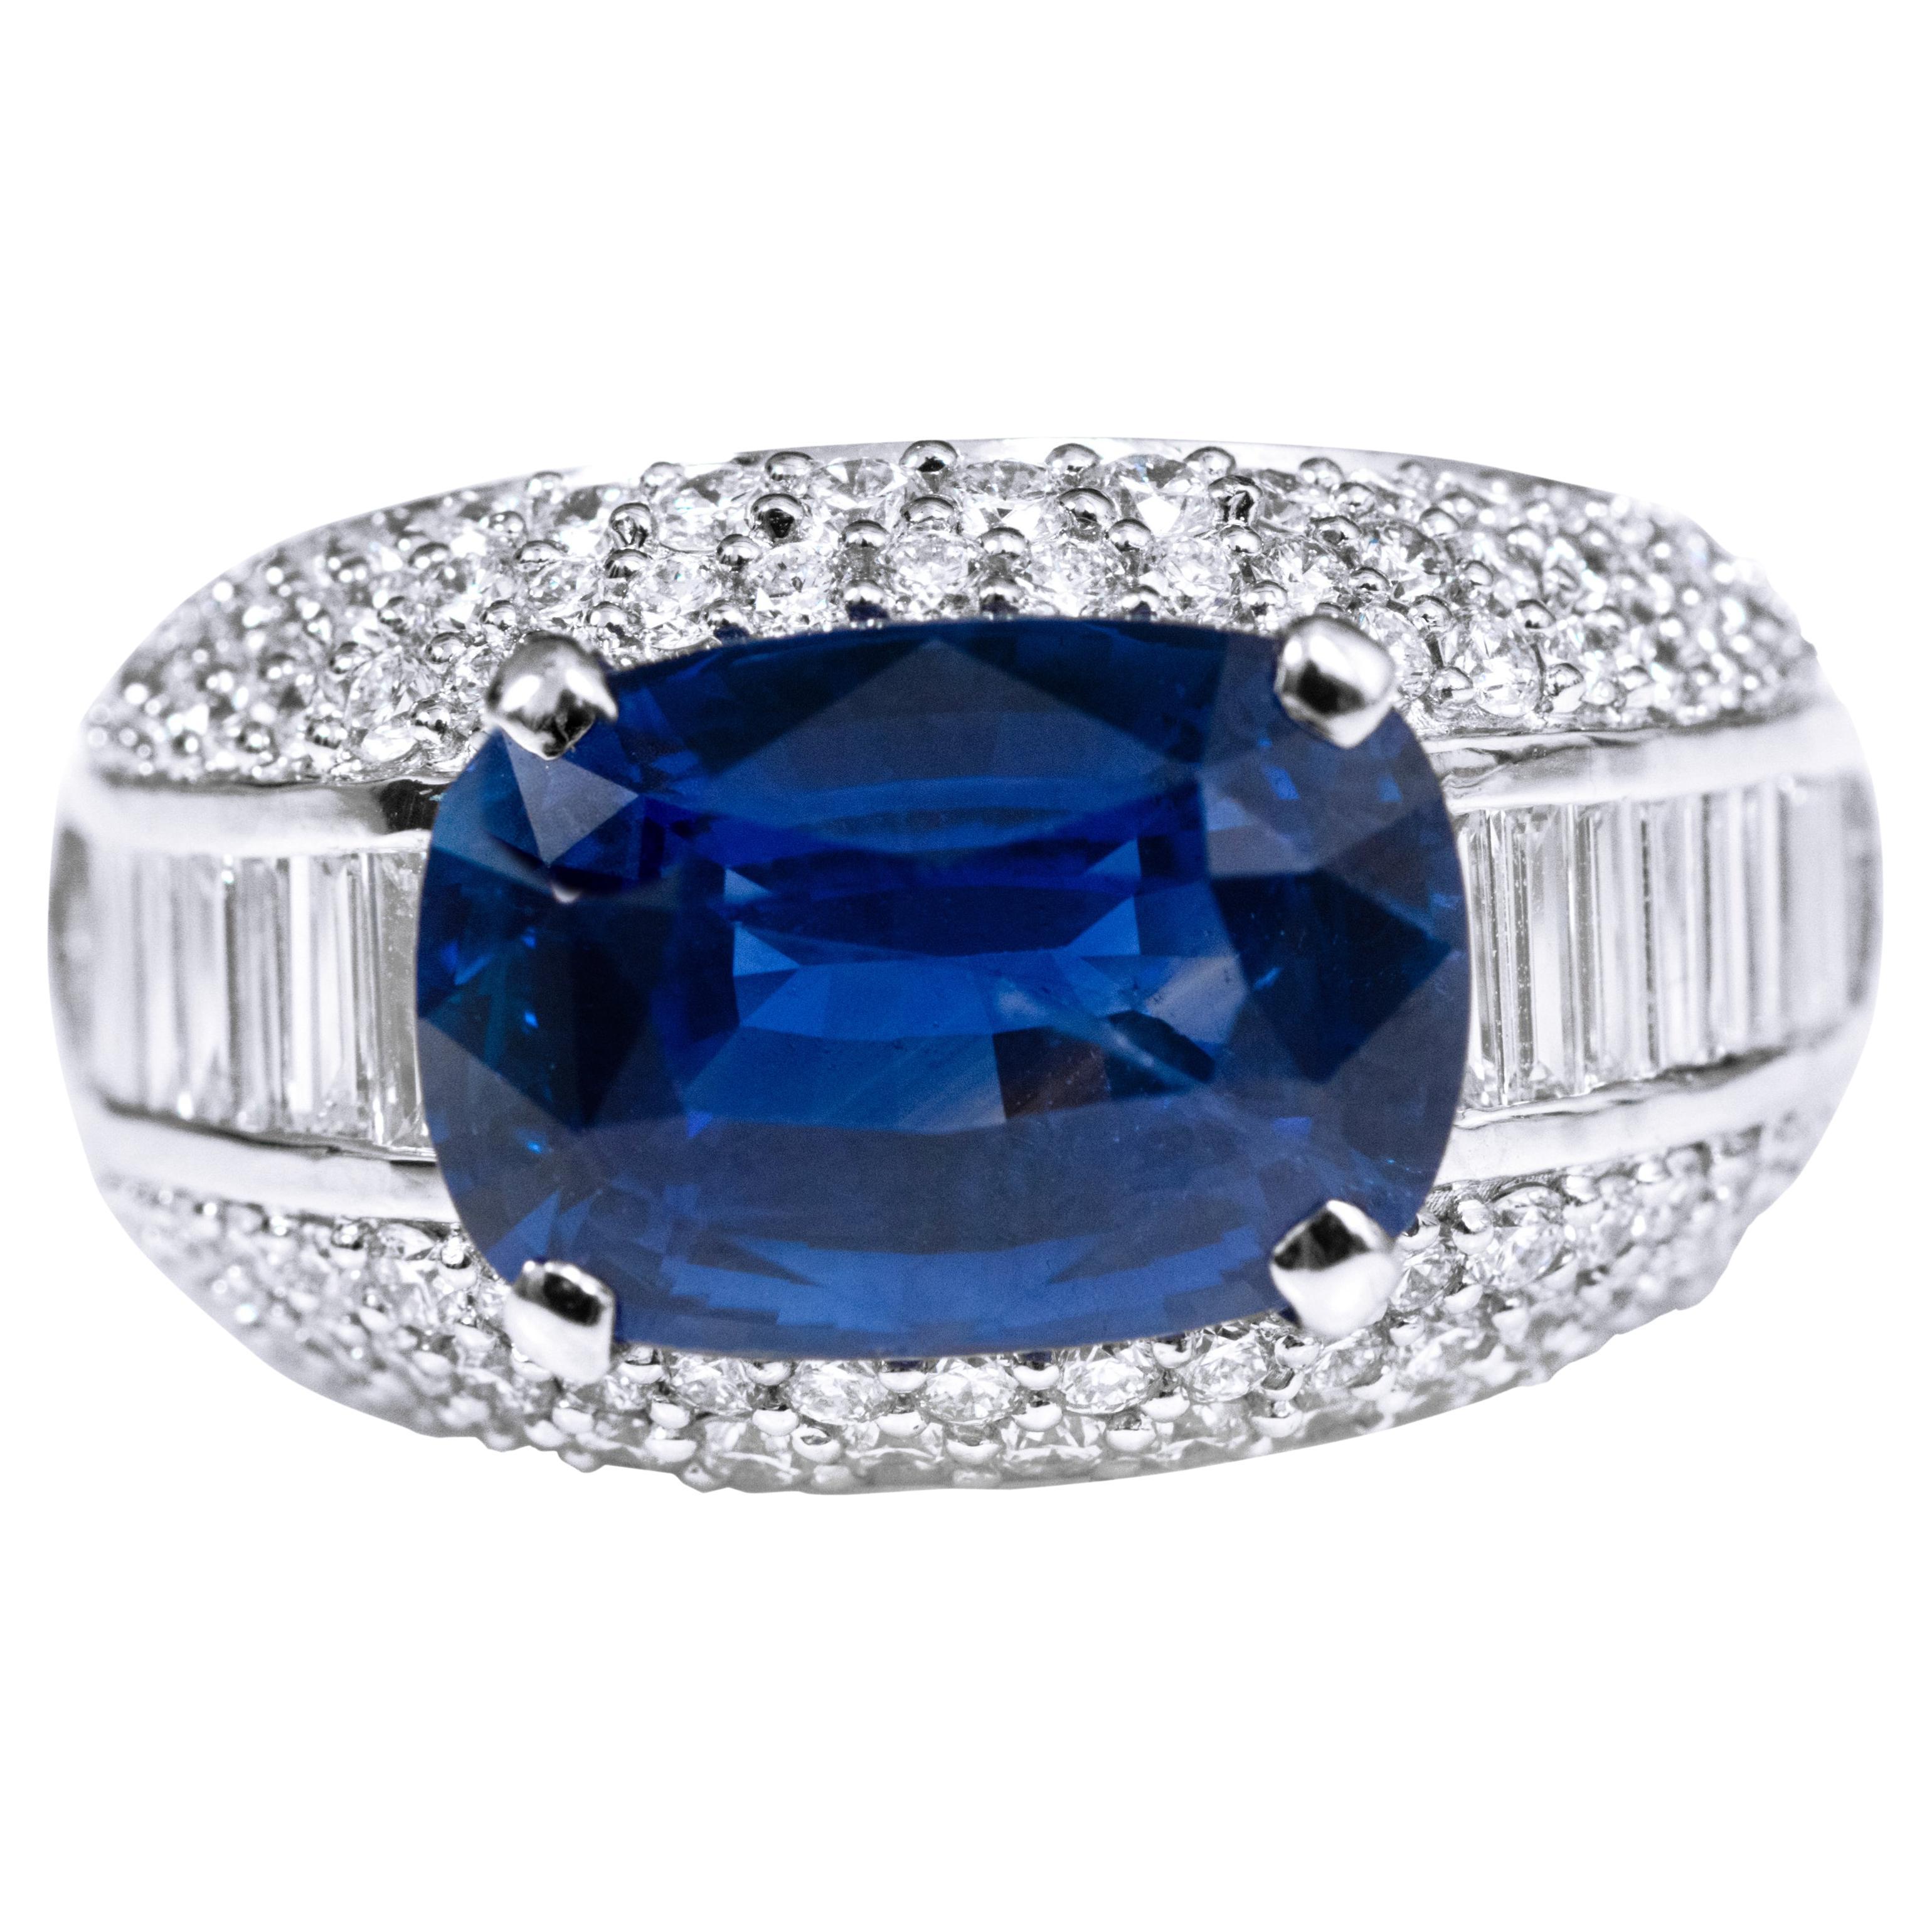 GIA Certified 8.16 Carat Royal Blue Sapphire and Diamond Solitaire Ring